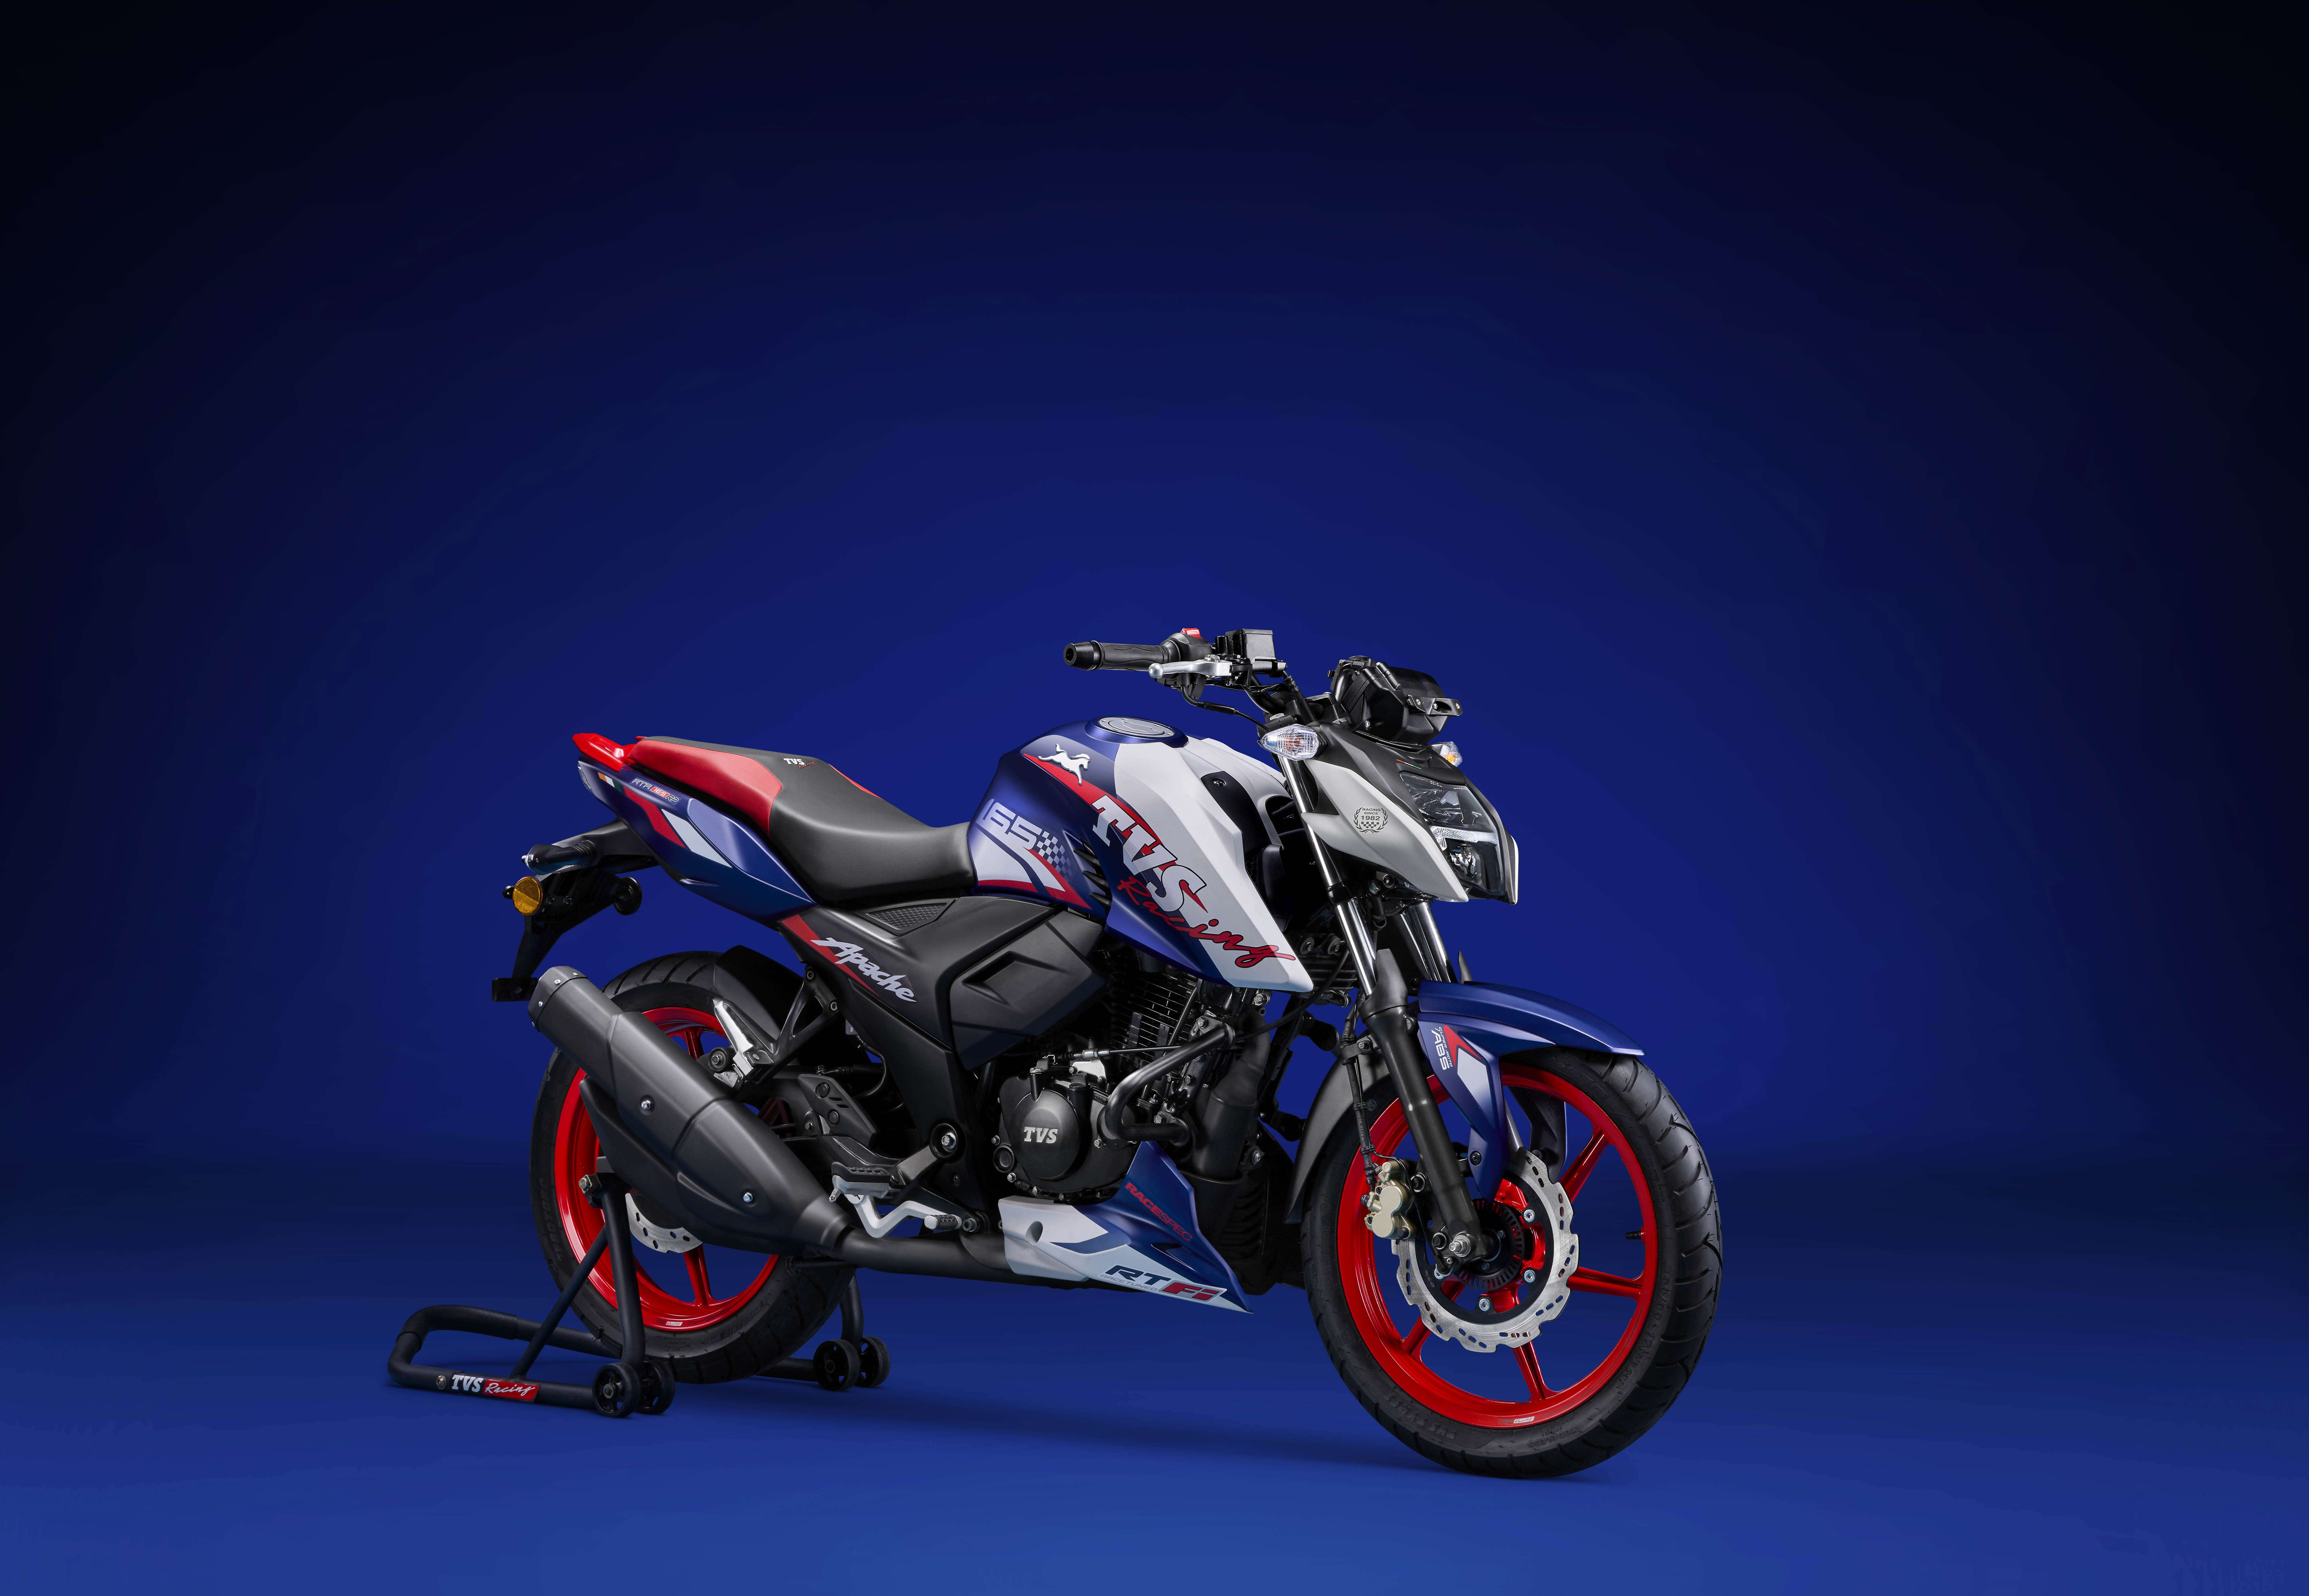 tvs-motor-company-announces-race-performance-series-inspired-from-tvs-racings-race-machine-lineage